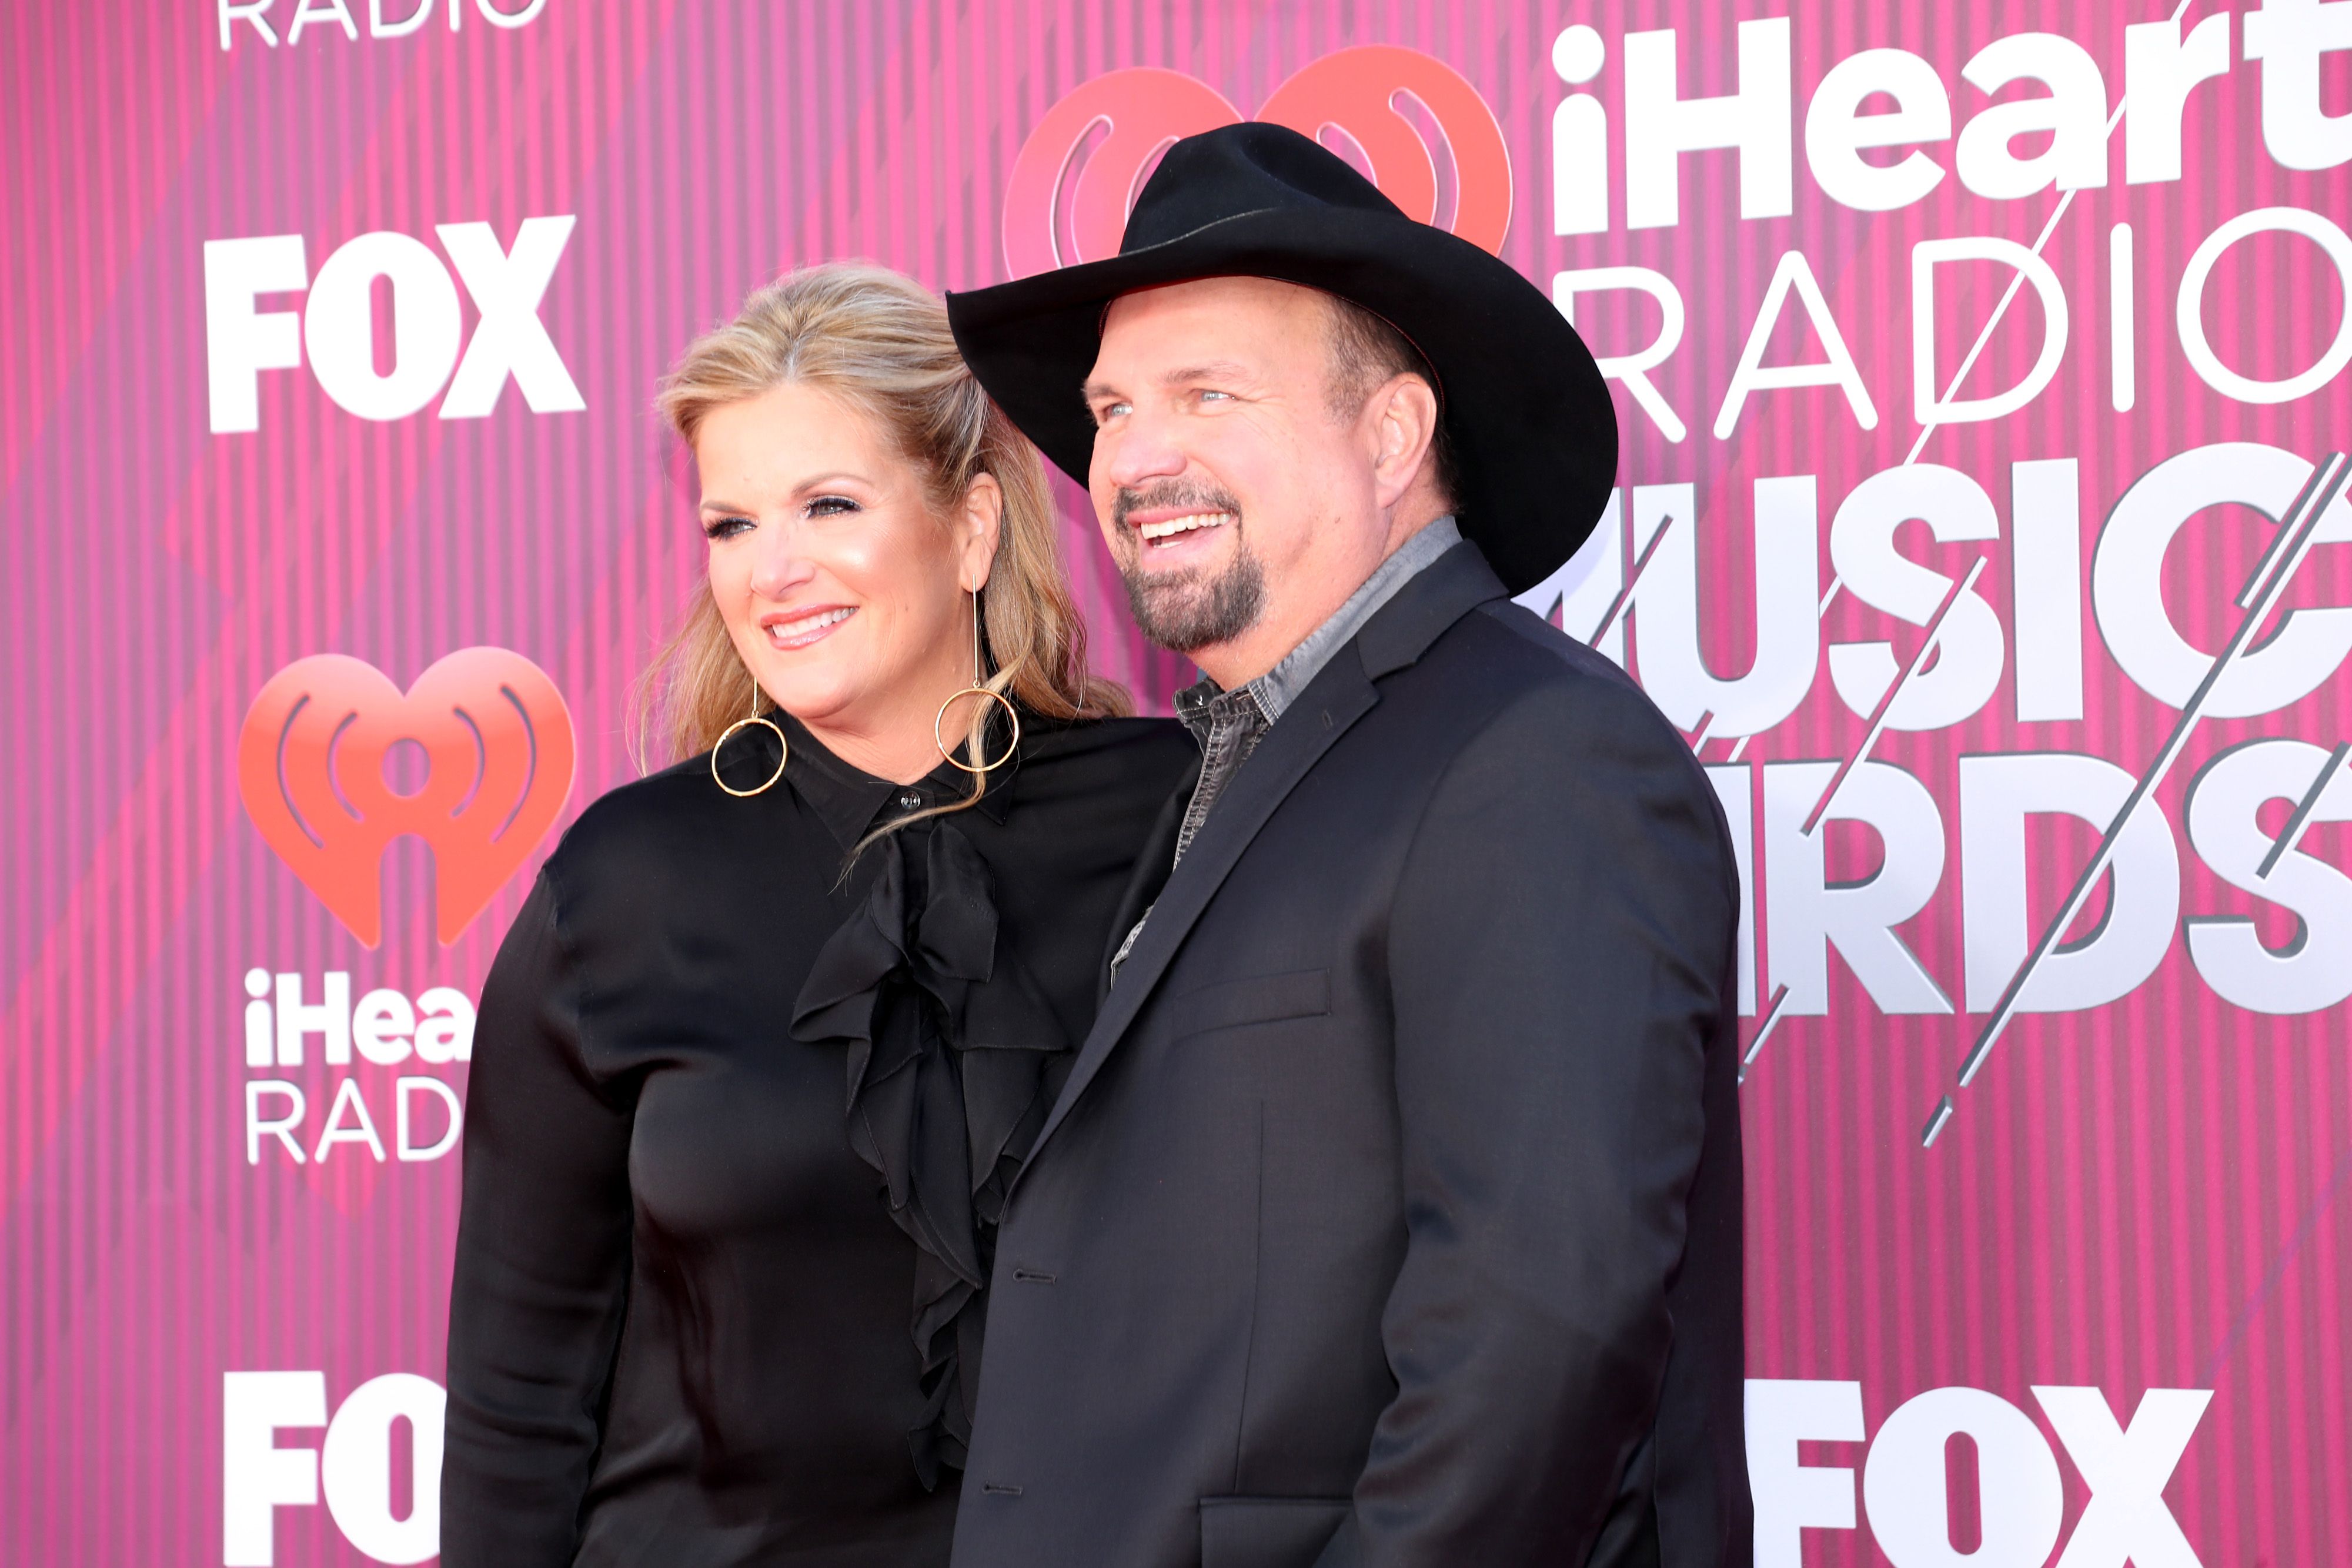 Trisha Yearwood and Garth Brooks at the iHeartRadio Music Awards which broadcasted live on FOX at Microsoft Theater on March 14, 2019. | Photo: Getty Images